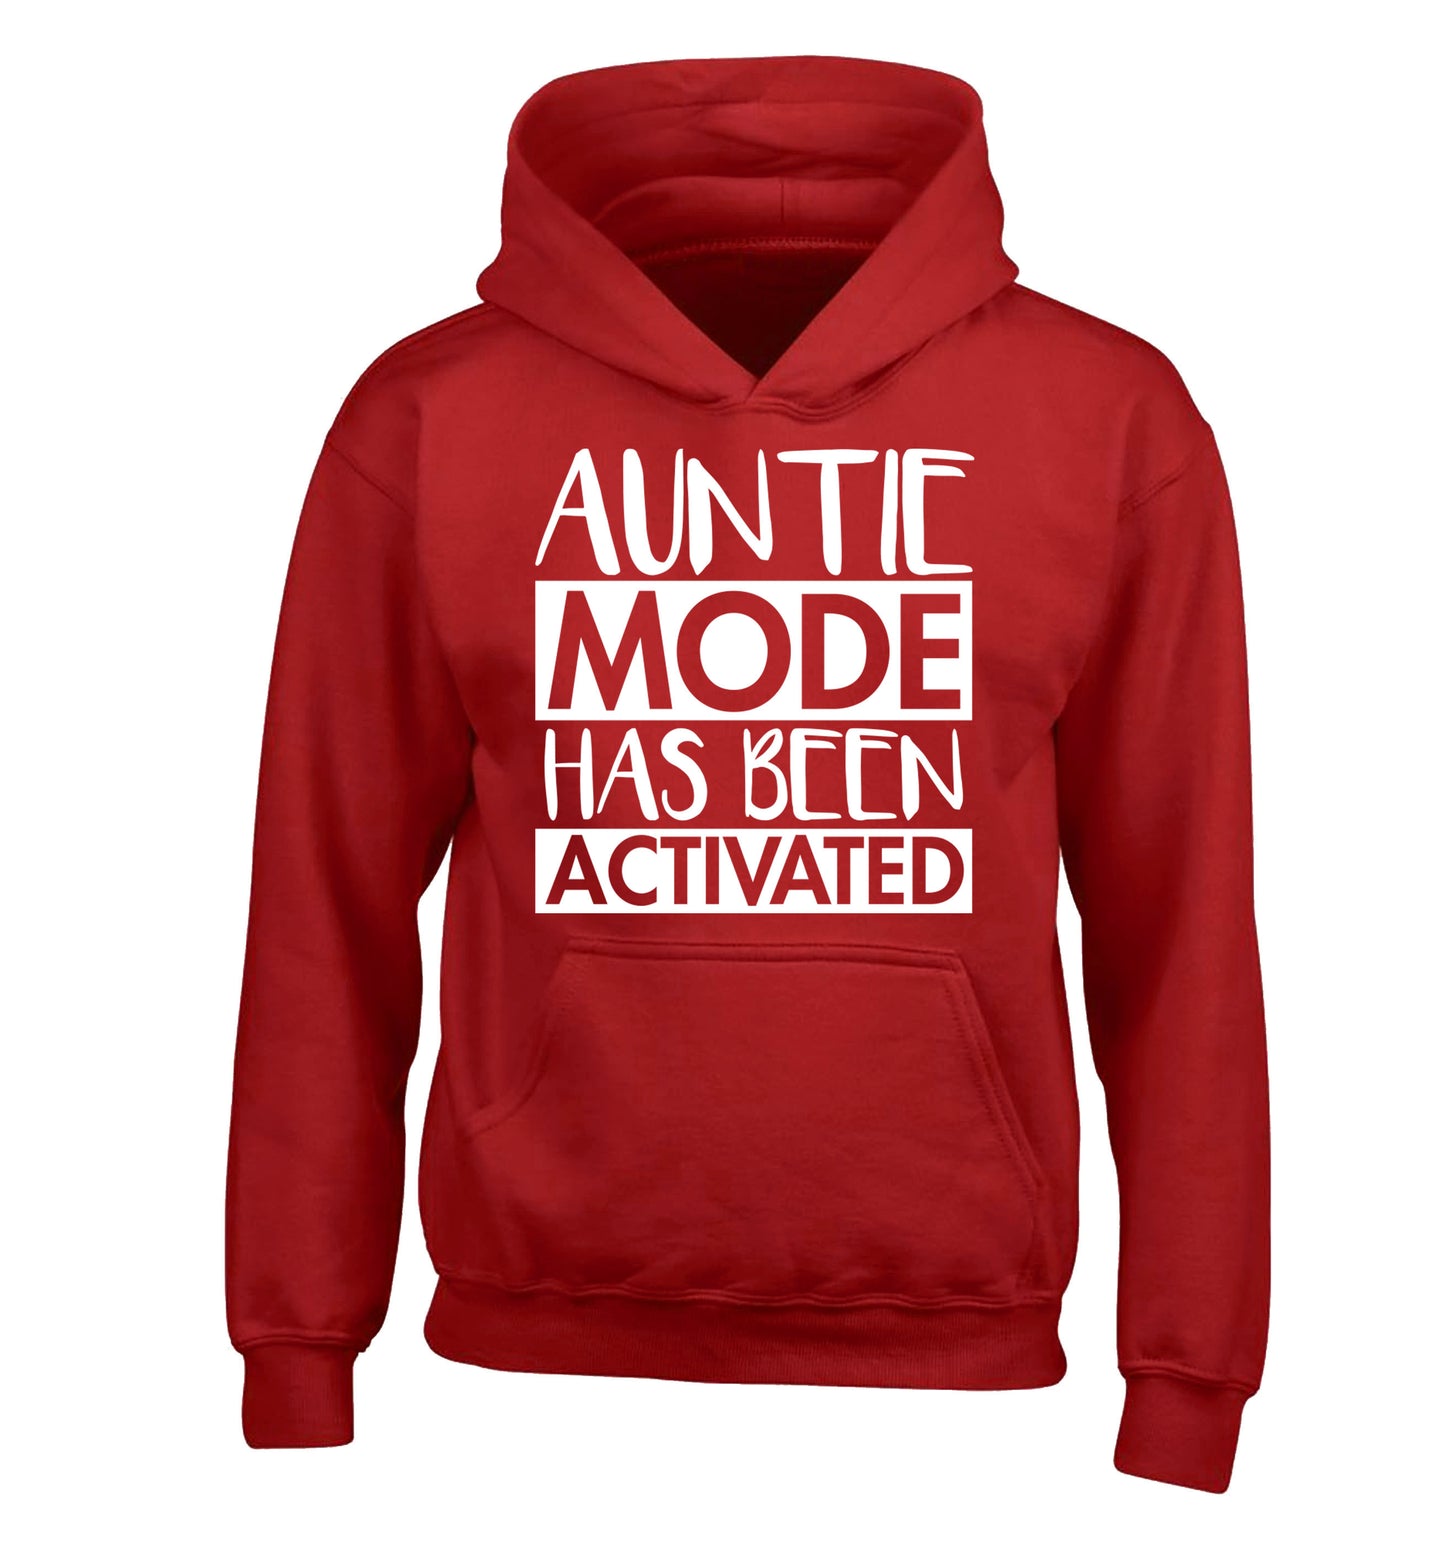 Auntie mode activated children's red hoodie 12-14 Years